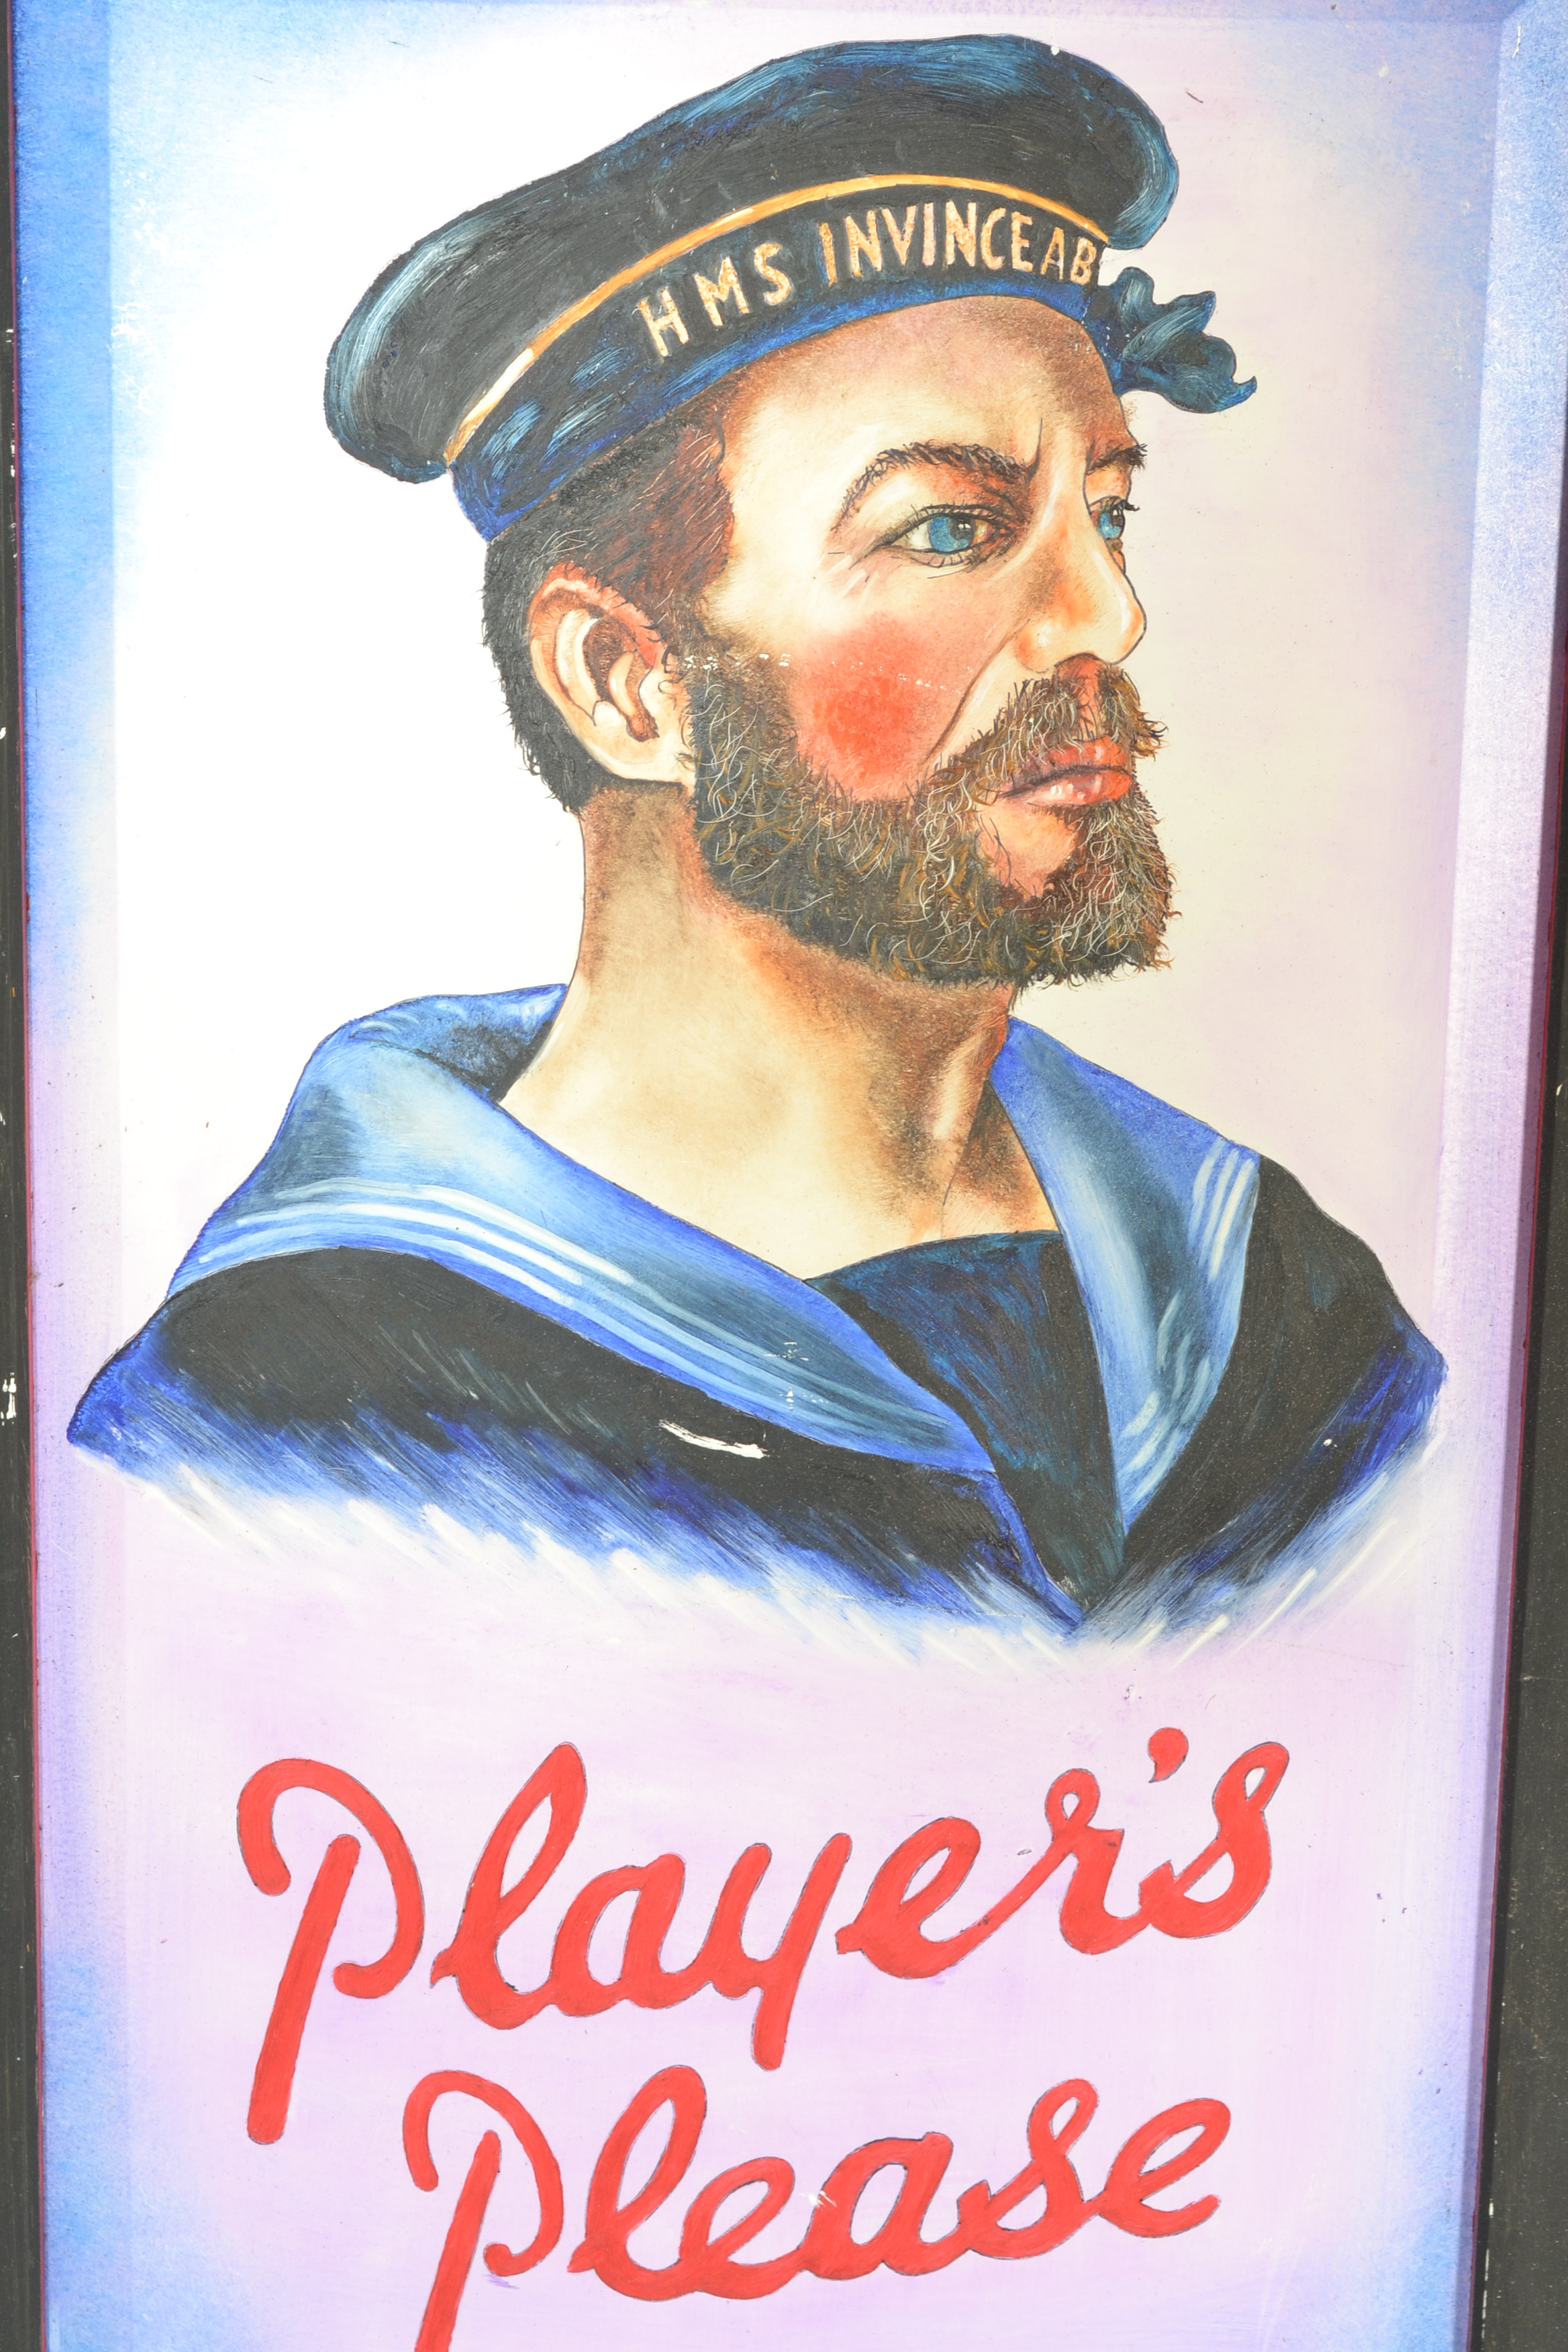 A contemporary artist's impression of a vintage enamel advertising sign on board for Player's Please - Image 2 of 4